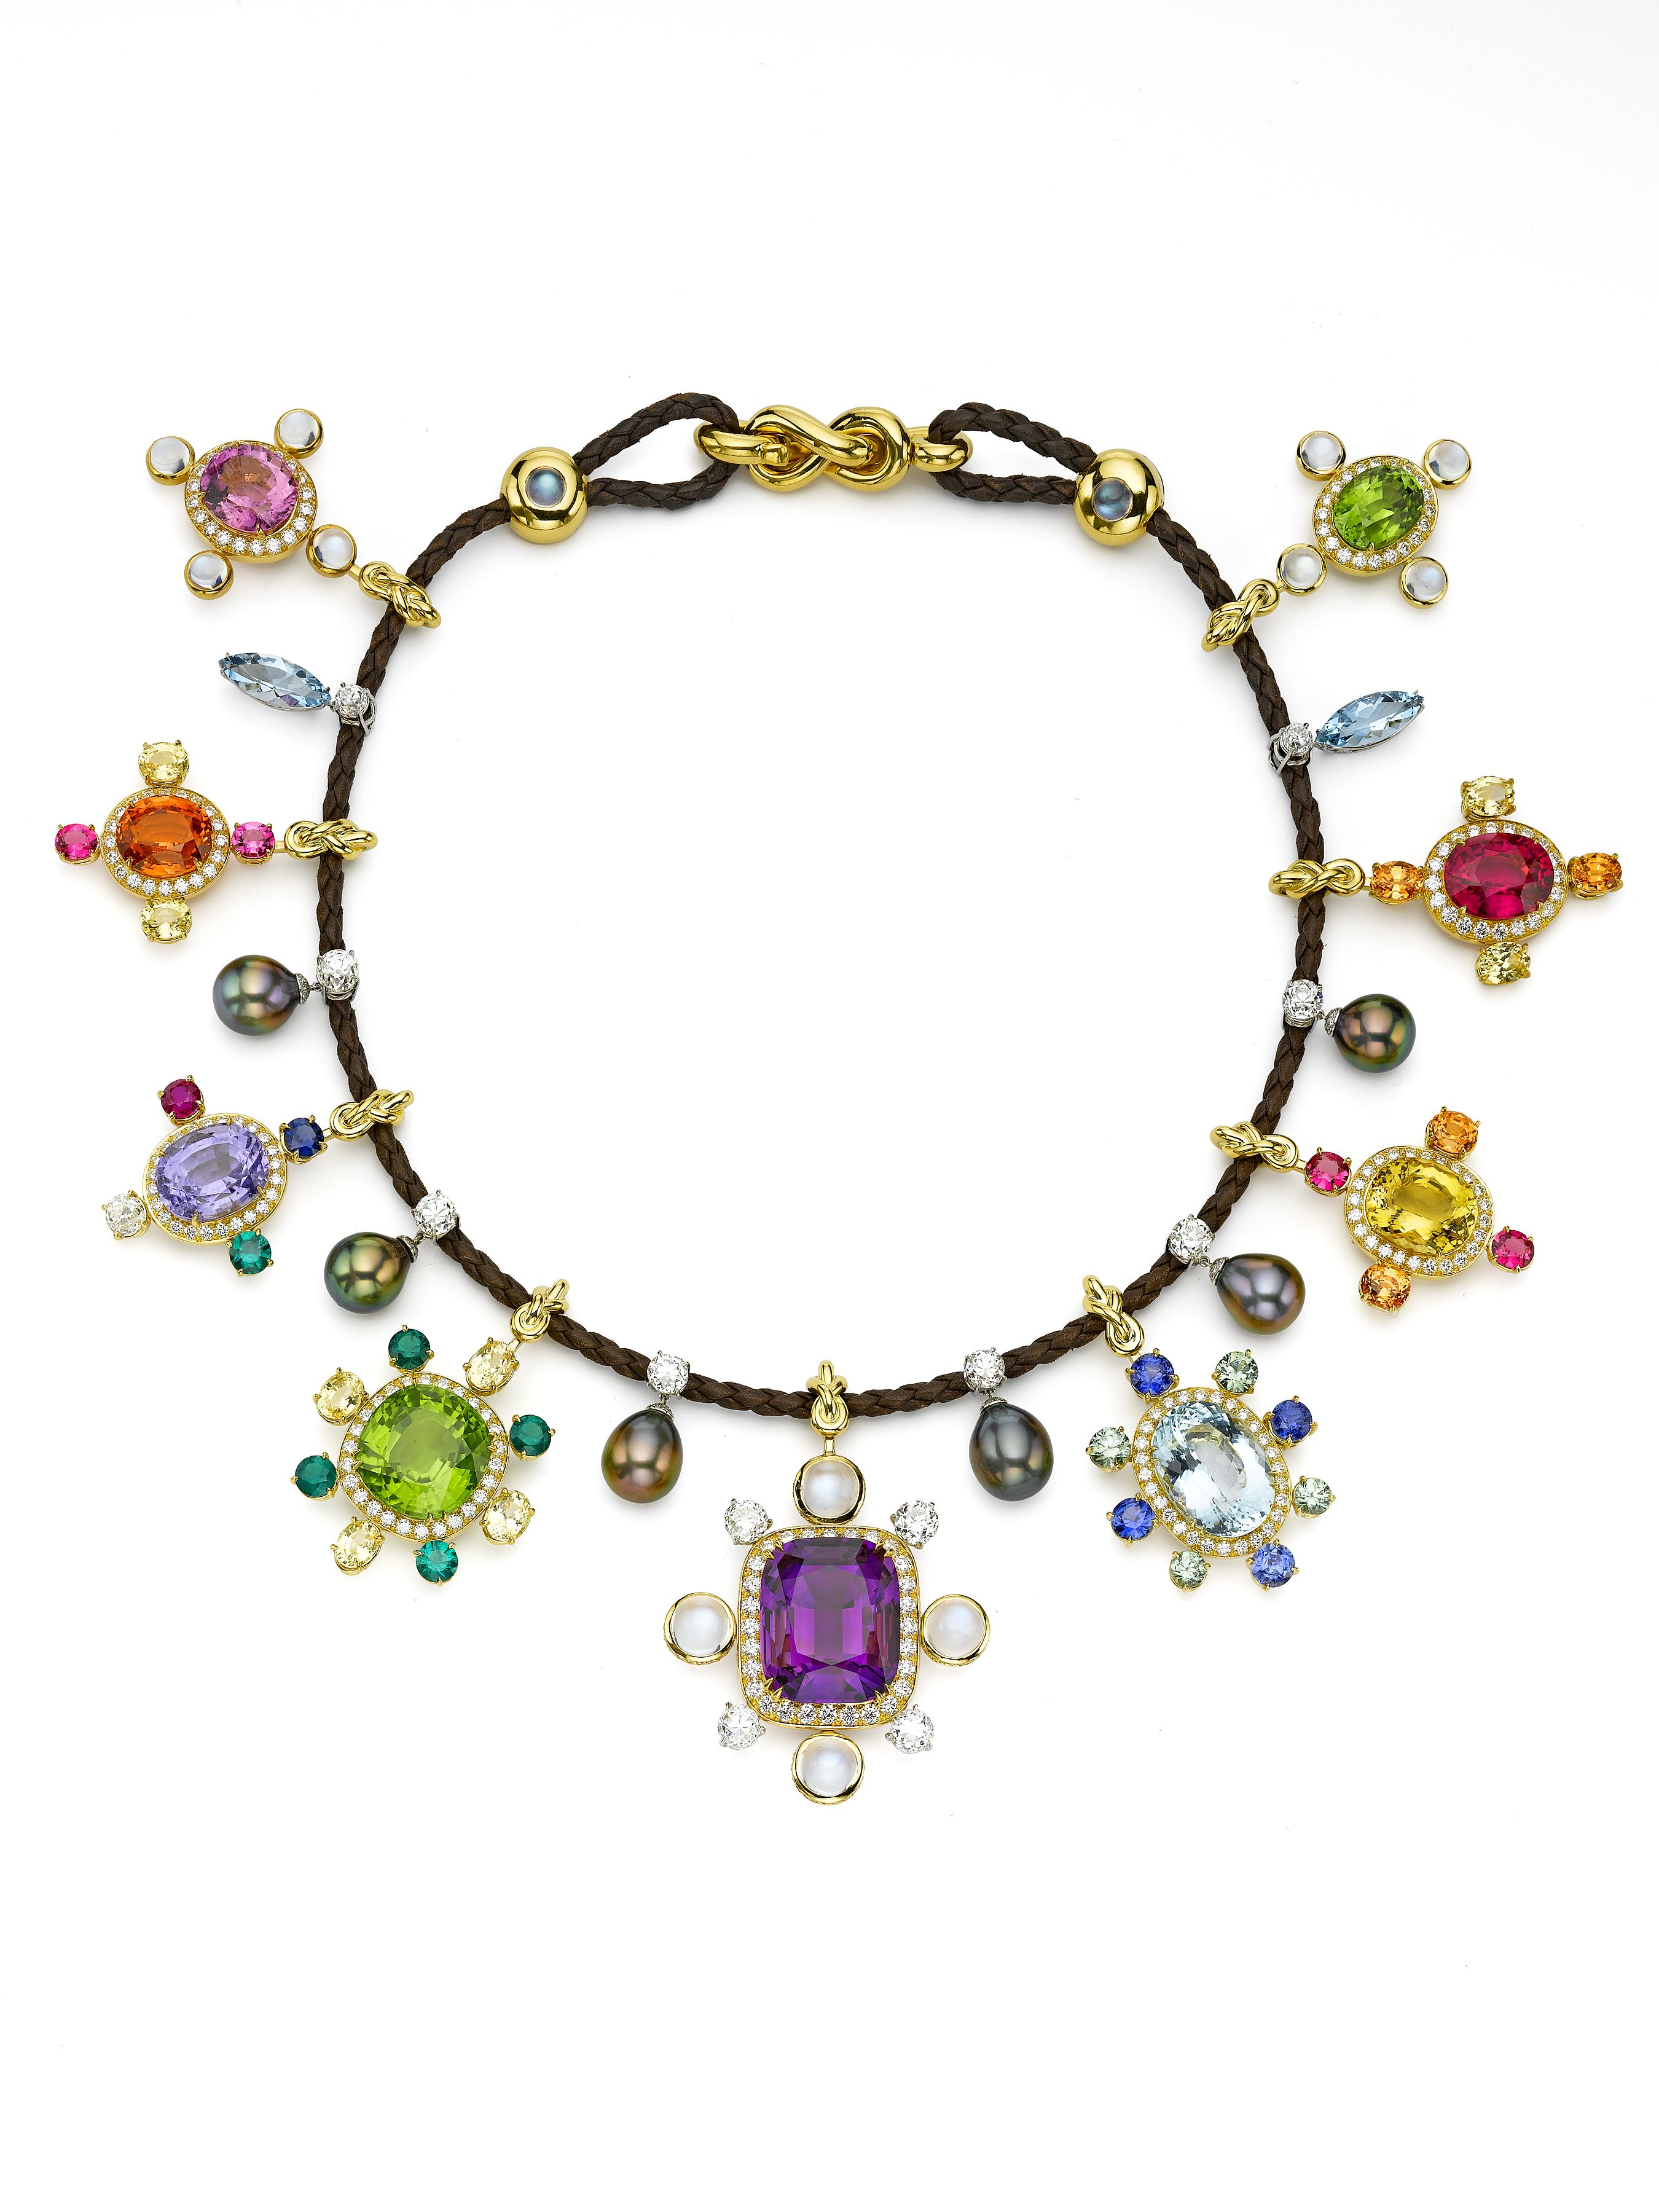 Prince Dimitri of Yugoslavia, Multicolor gem necklace on leather with an amethyst center that belonged to Queen Elena of Italy. Photo courtesy of Prince Dimitri